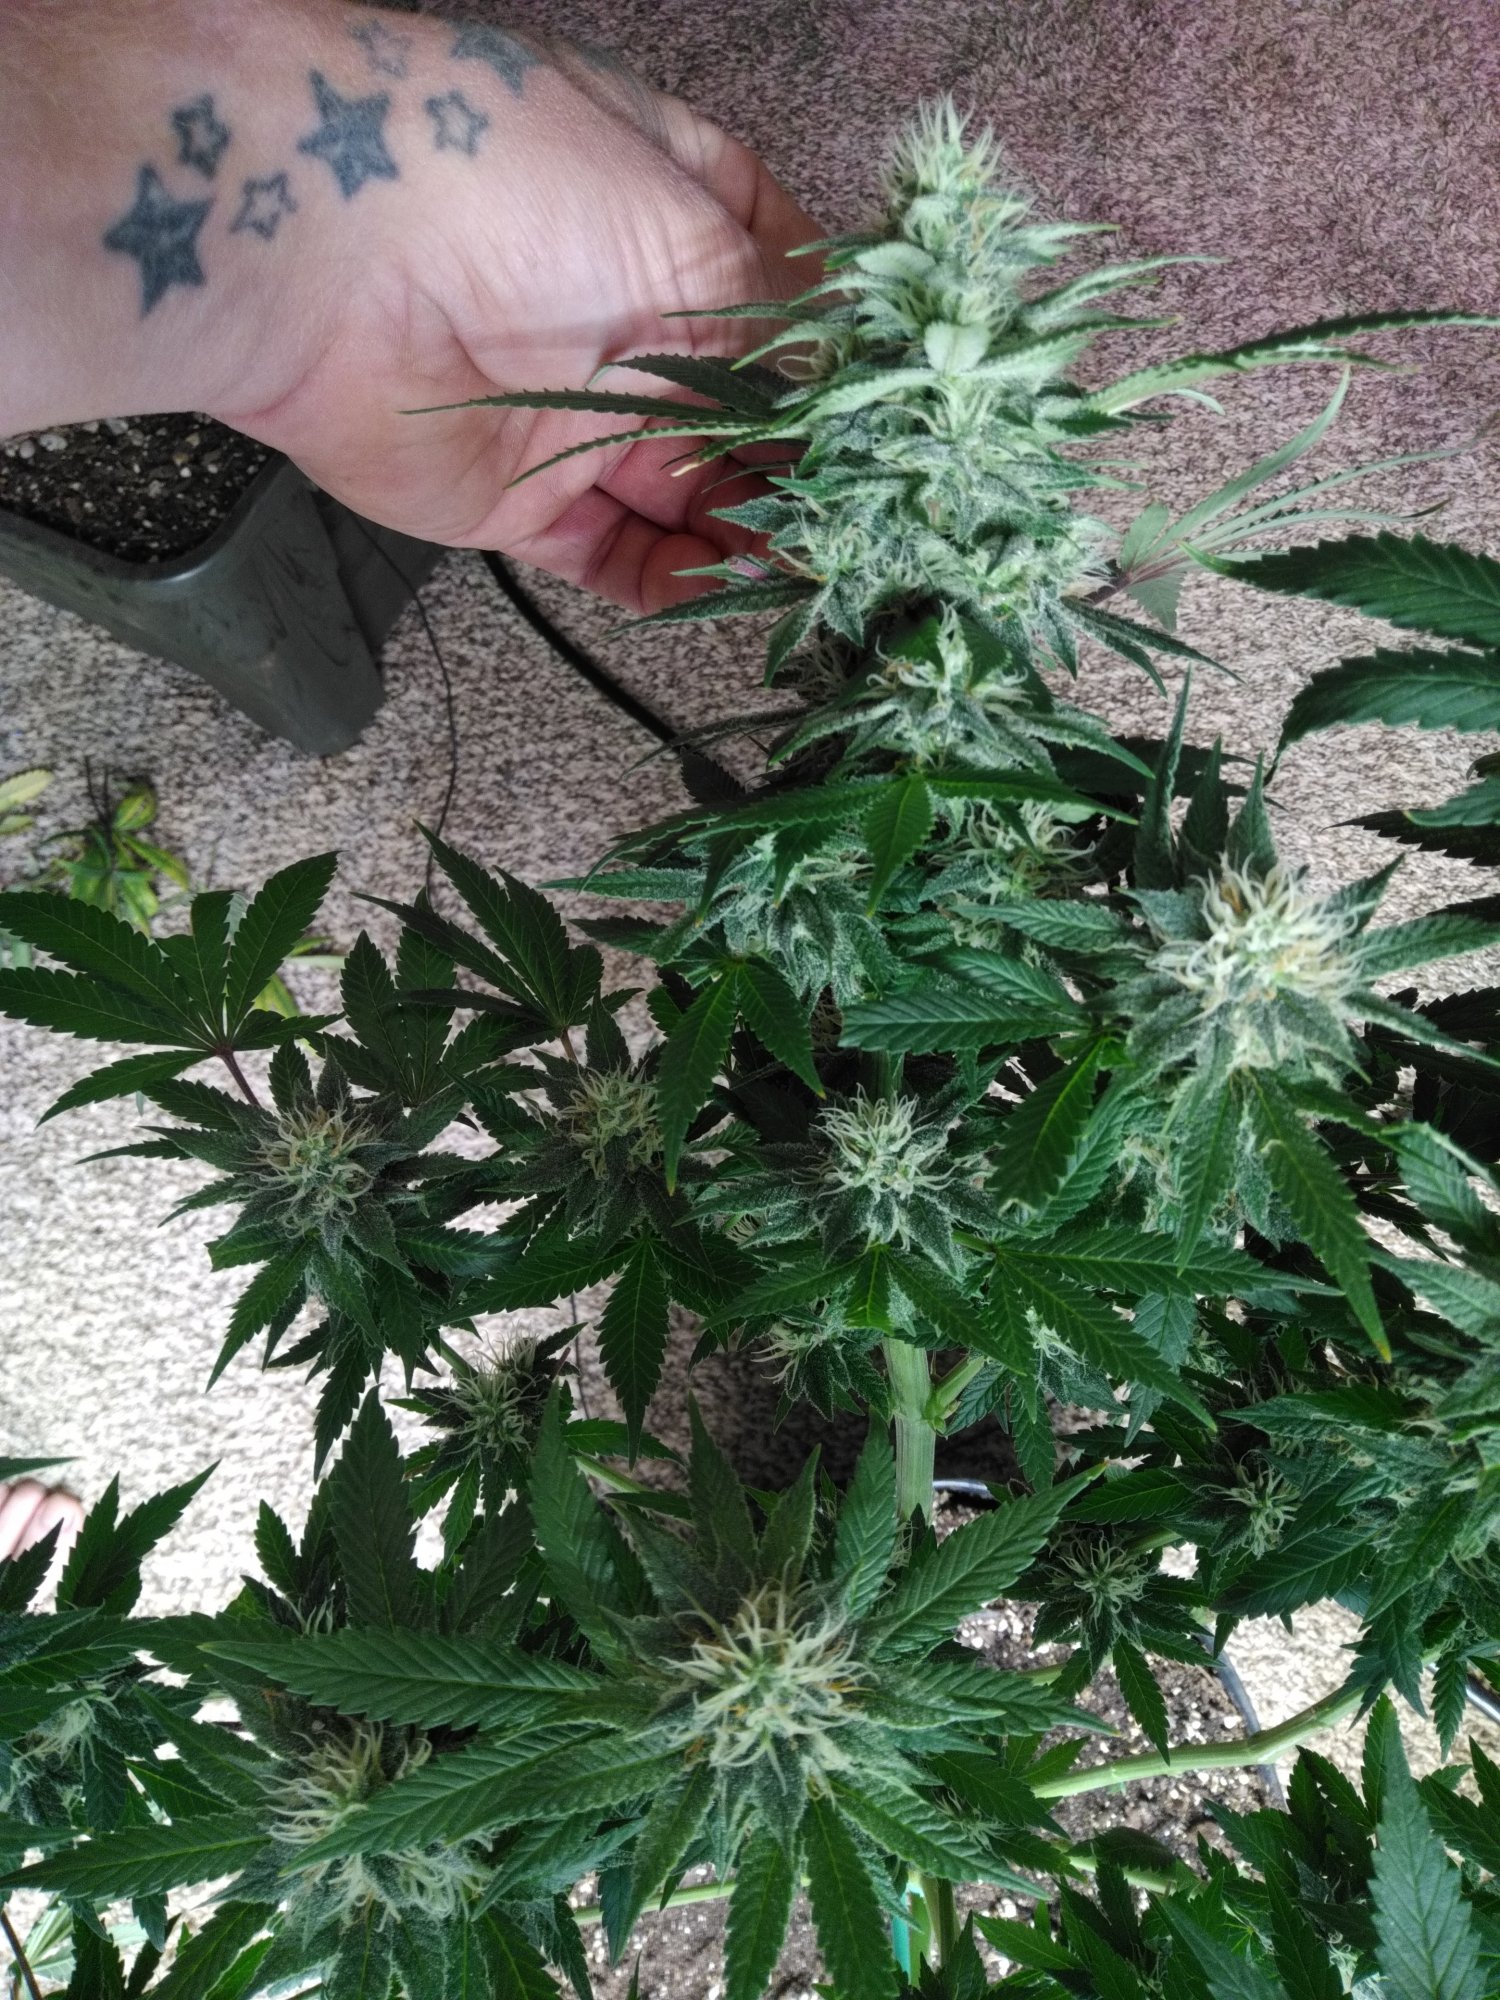 Check me out my biggest buds yet 6